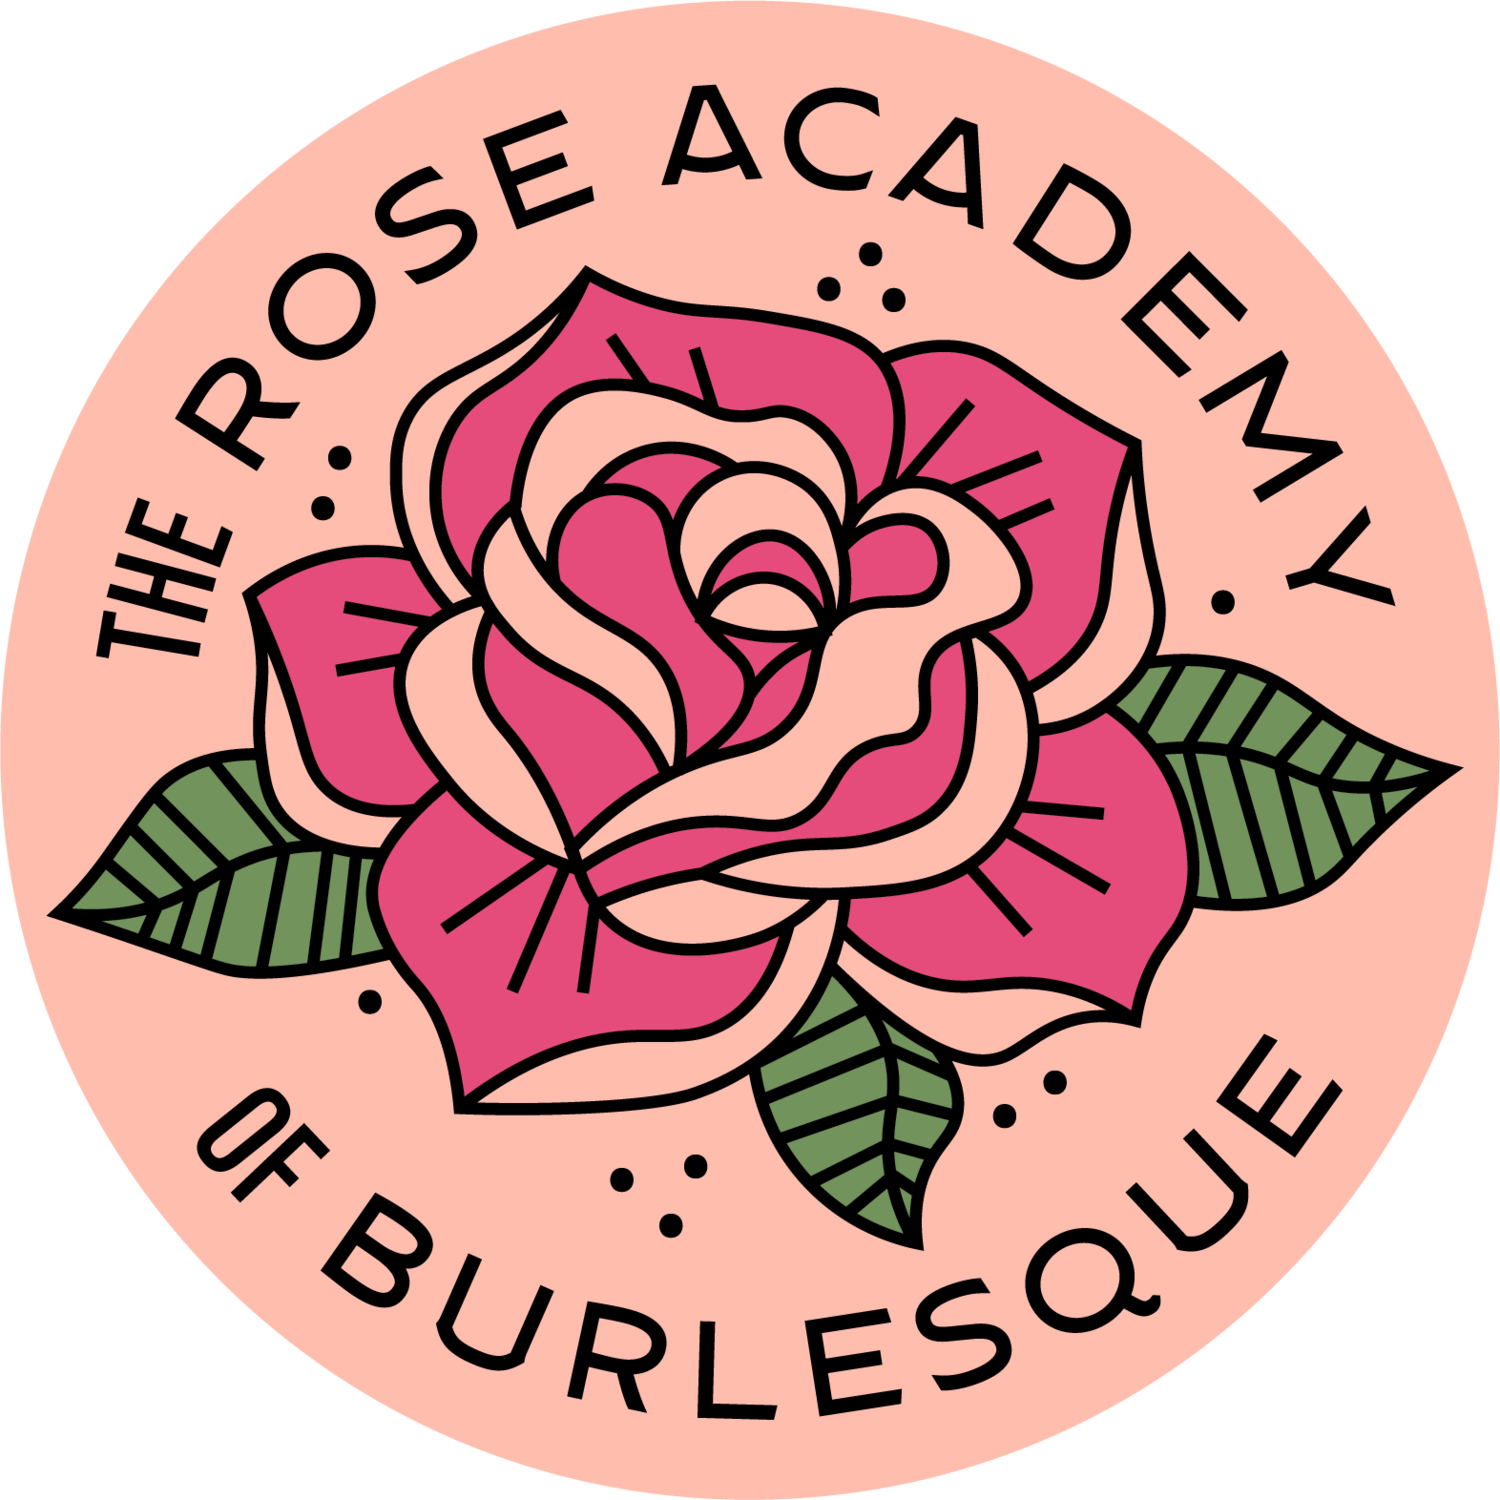 The Rose Academy of Burlesque